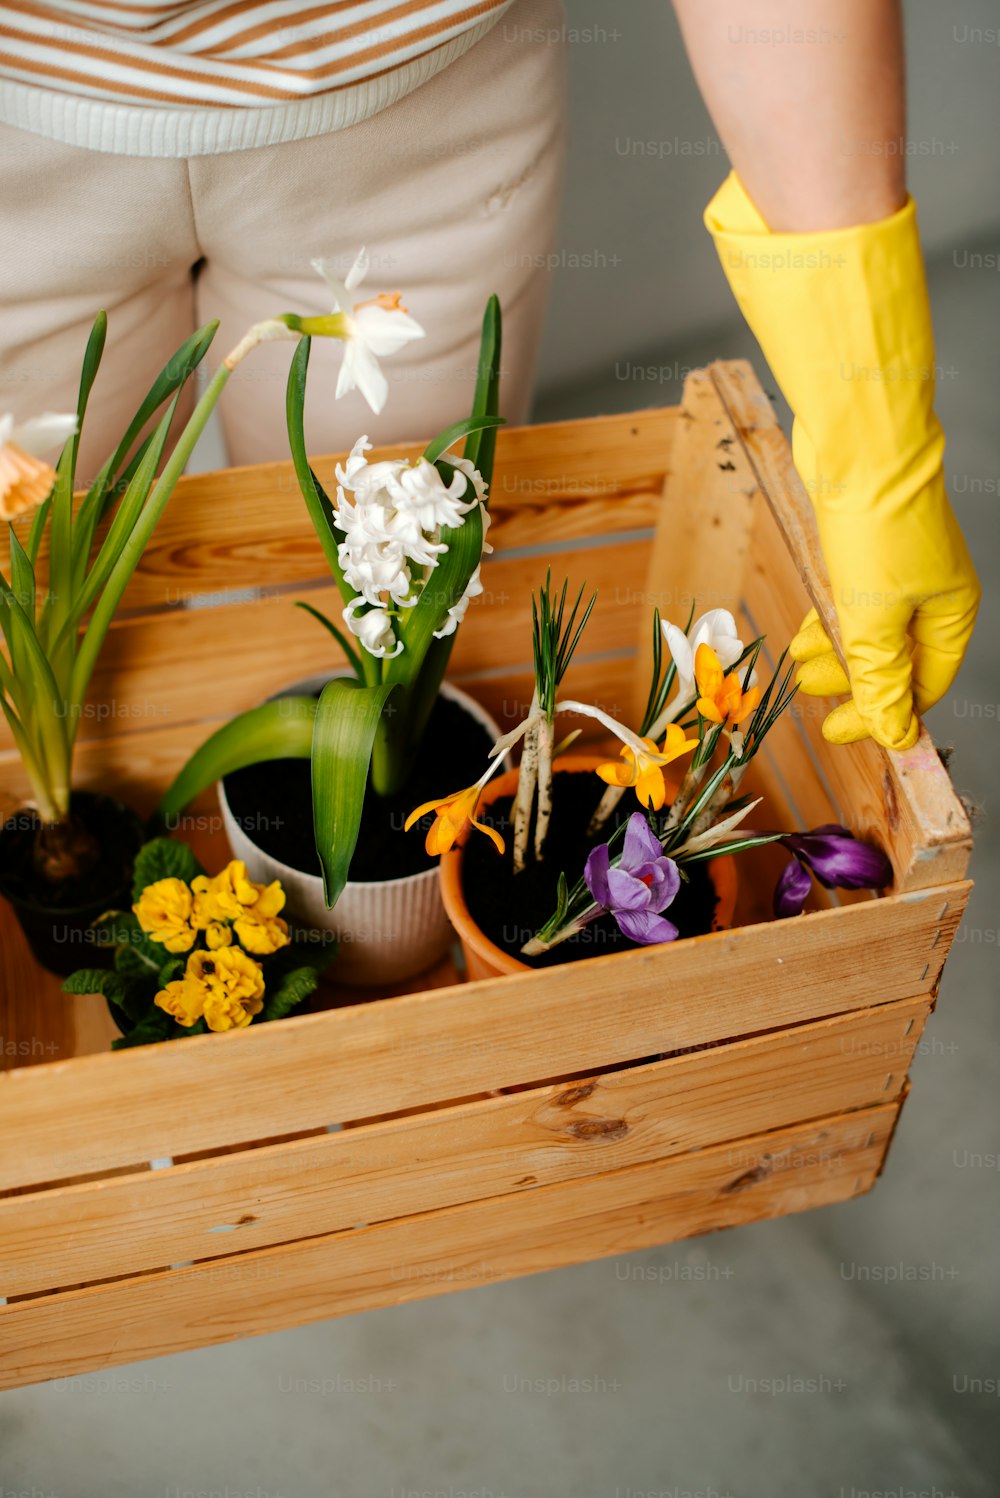 a person holding a wooden box filled with flowers